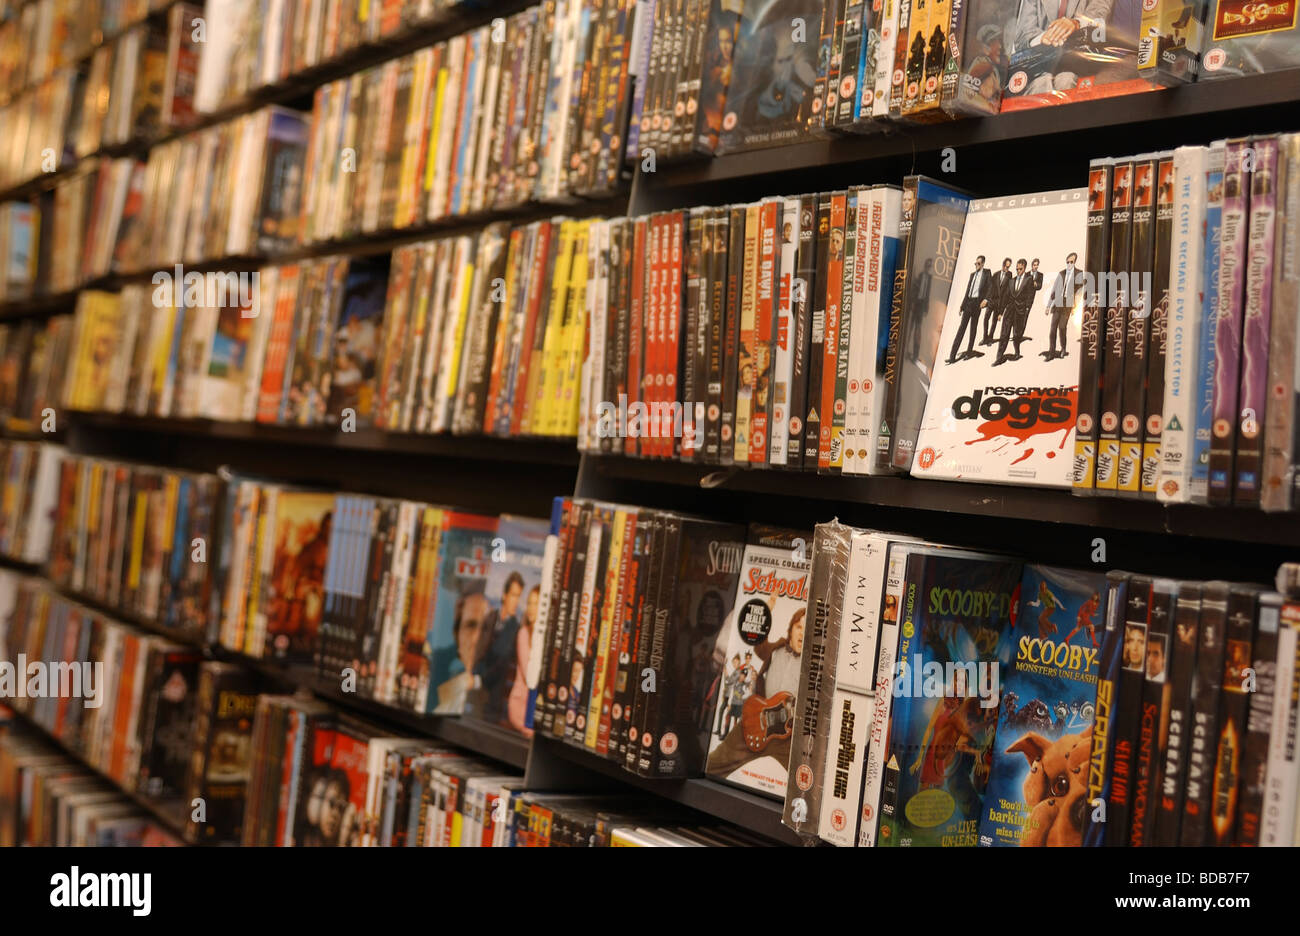 A shelf of DVDs for sale in a high street store Stock Photo